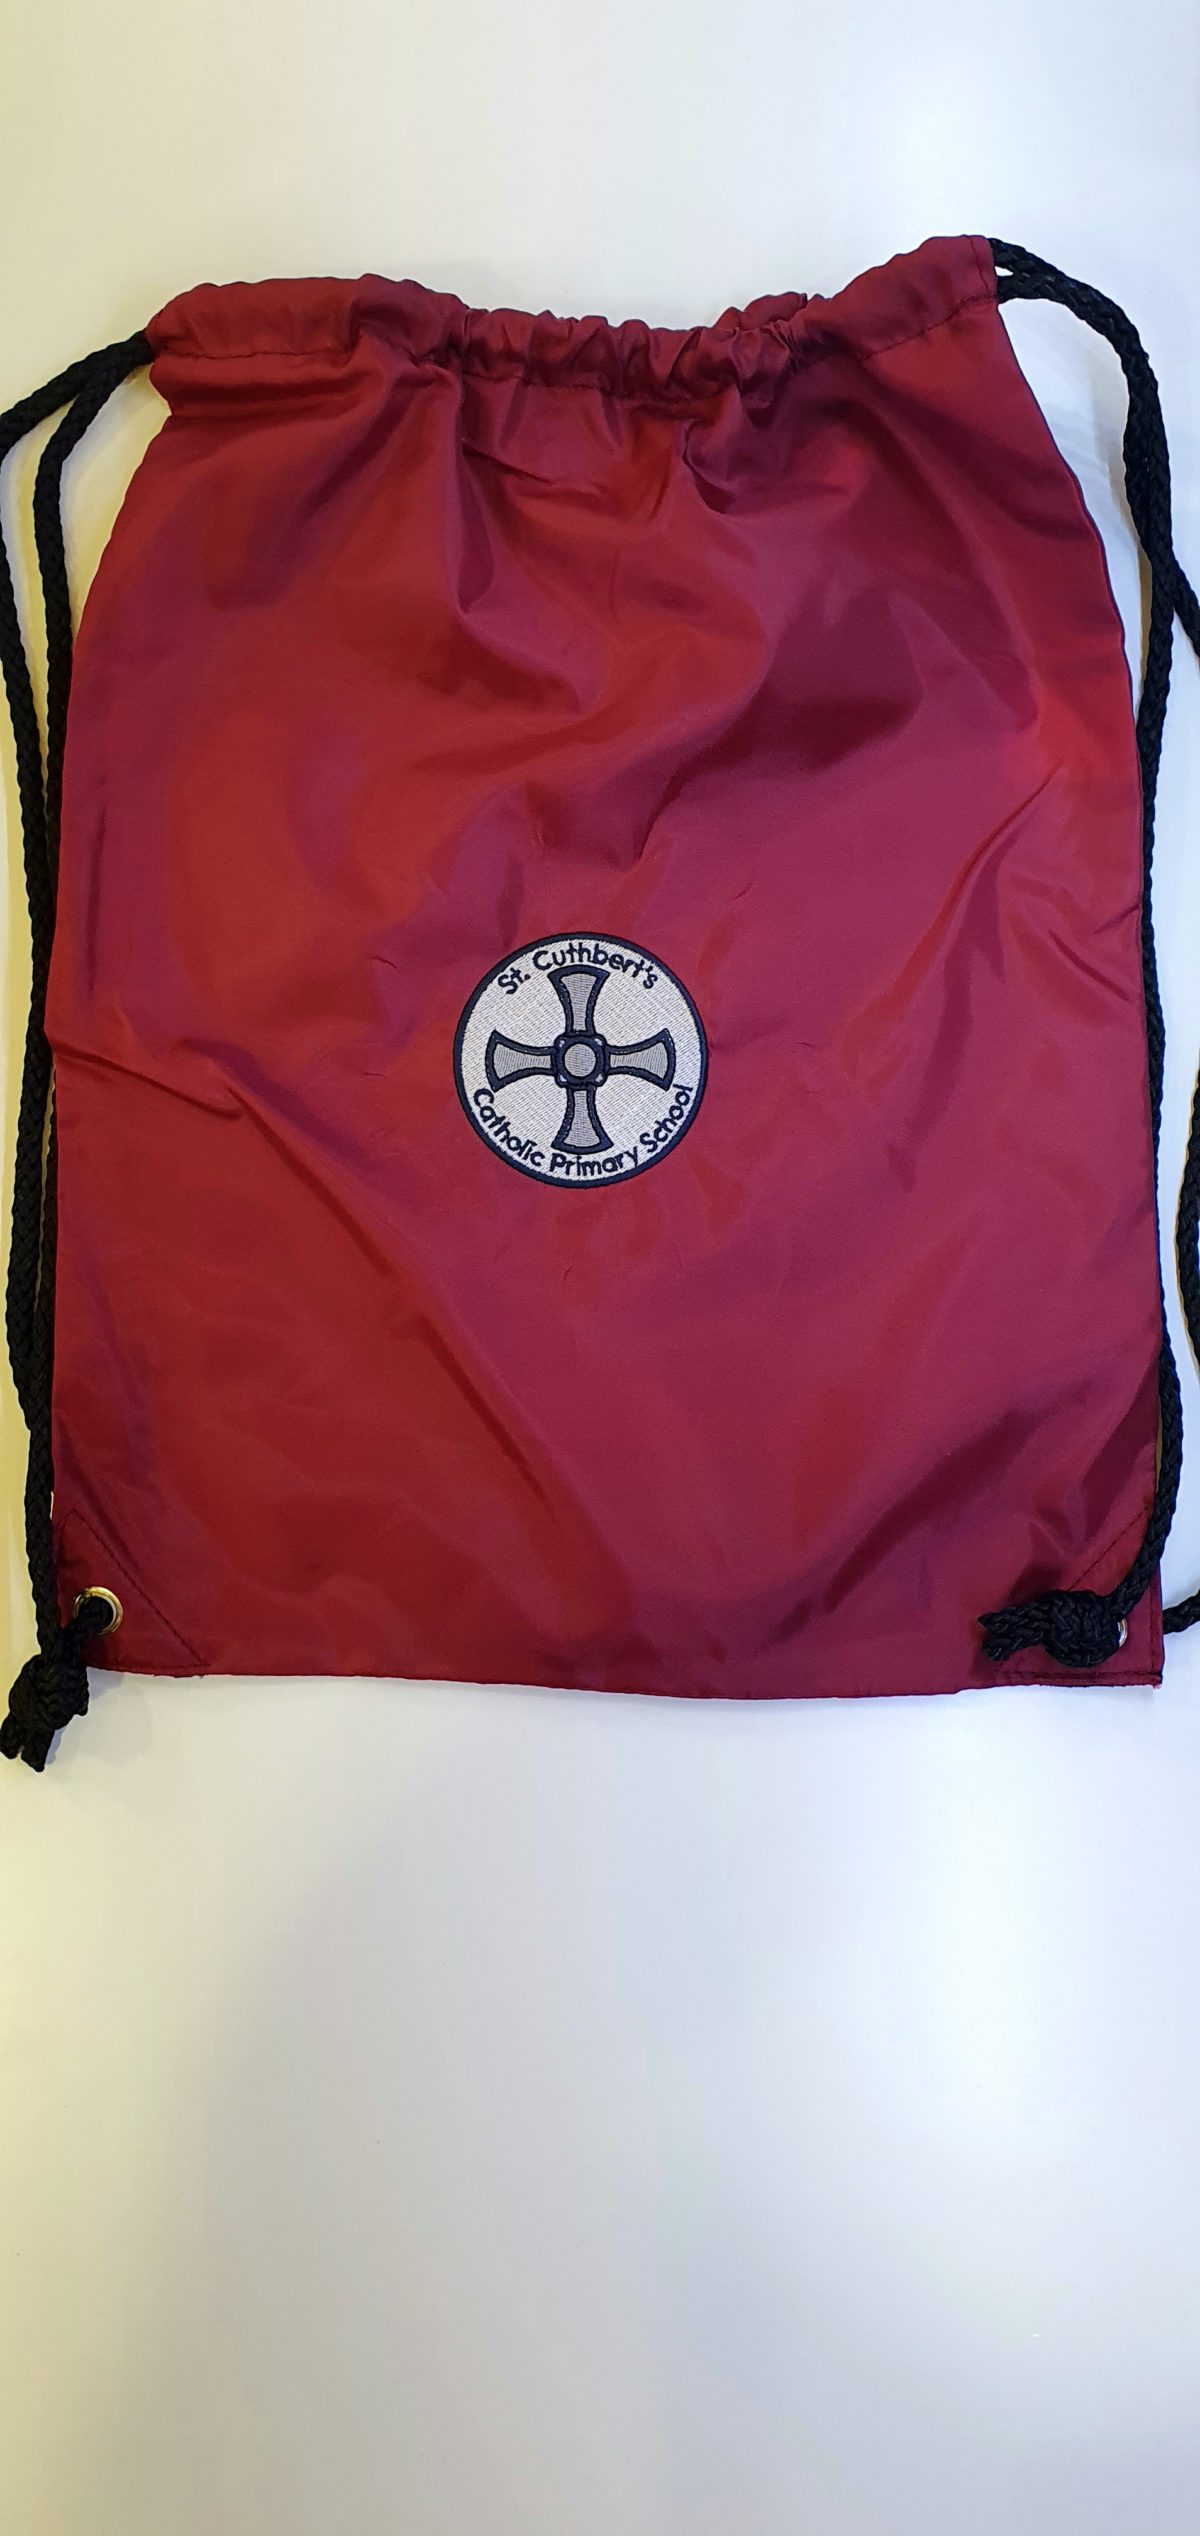 P.E. KIT BAG with embroidered school logo